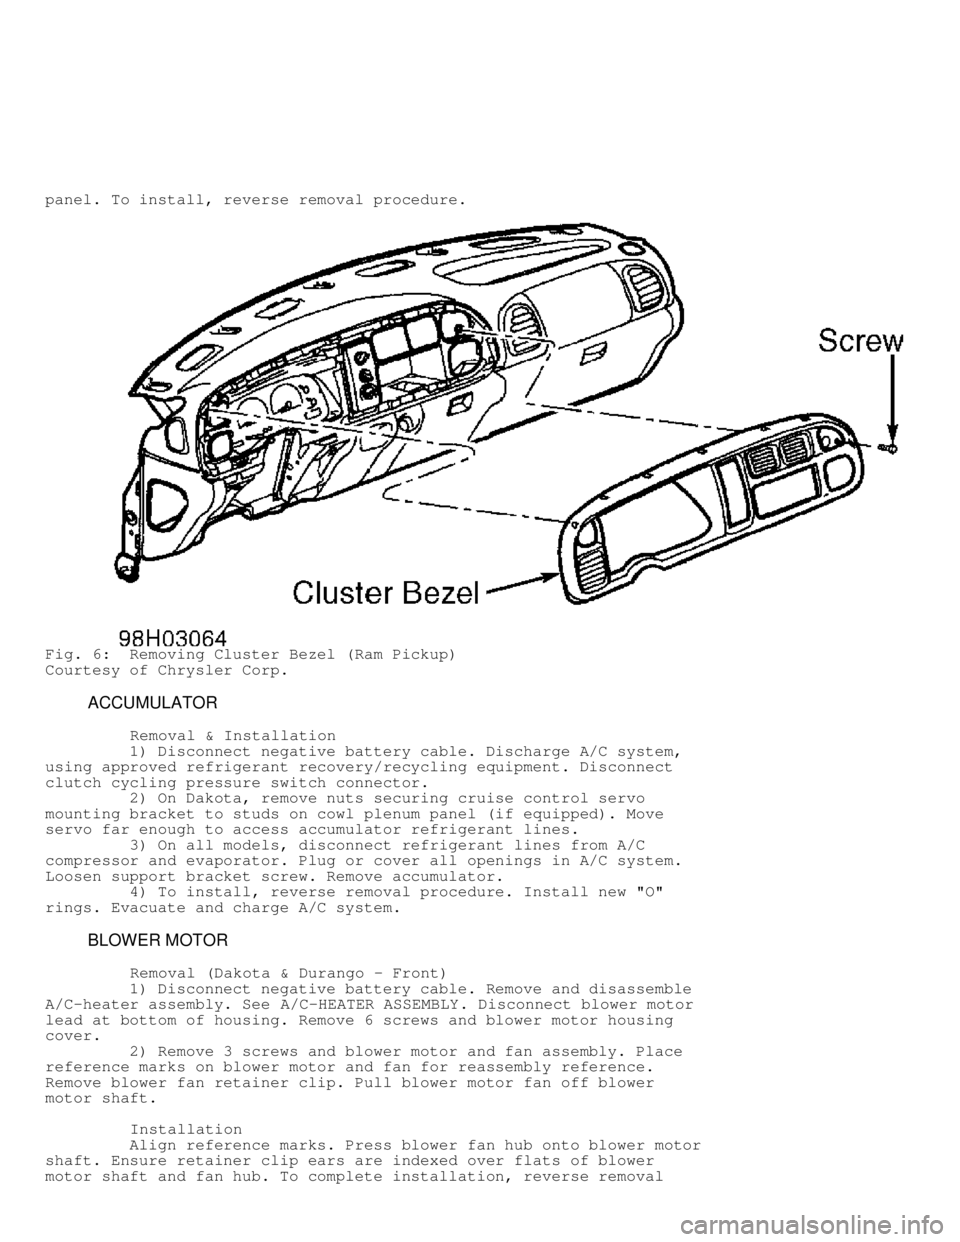 DODGE RAM 1999  Service Repair Manual panel. To install, reverse removal procedure.
Fig. 6:  Removing Cluster Bezel (Ram Pickup)
Courtesy of Chrysler Corp.
         ACCUMULATOR
          Removal & Installation
         1) Disconnect negat